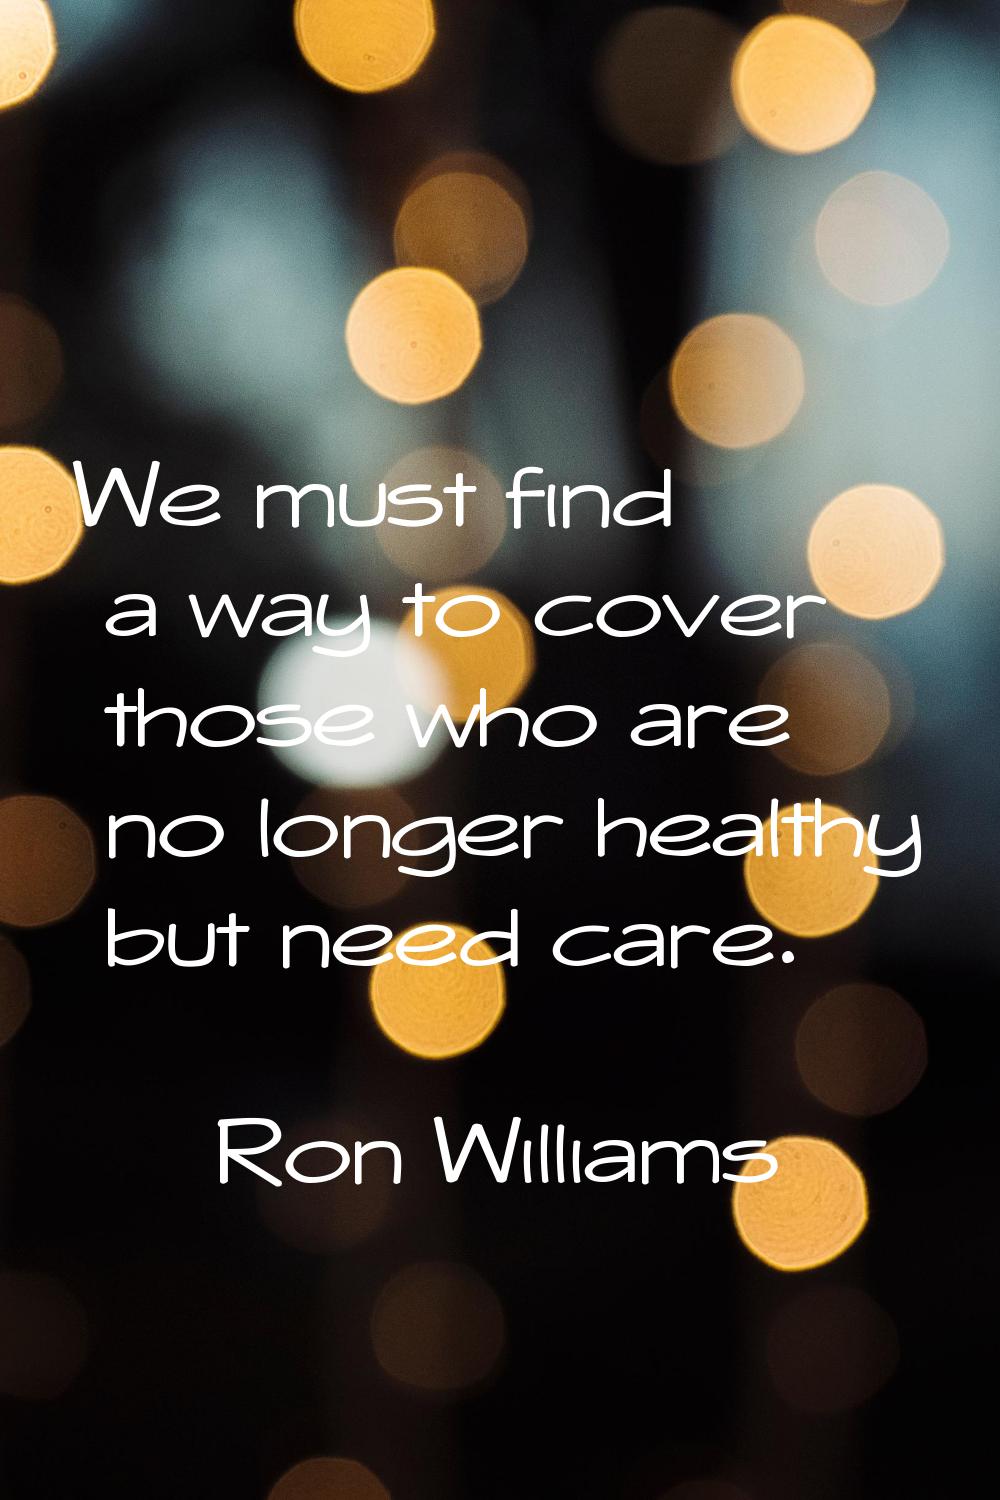 We must find a way to cover those who are no longer healthy but need care.